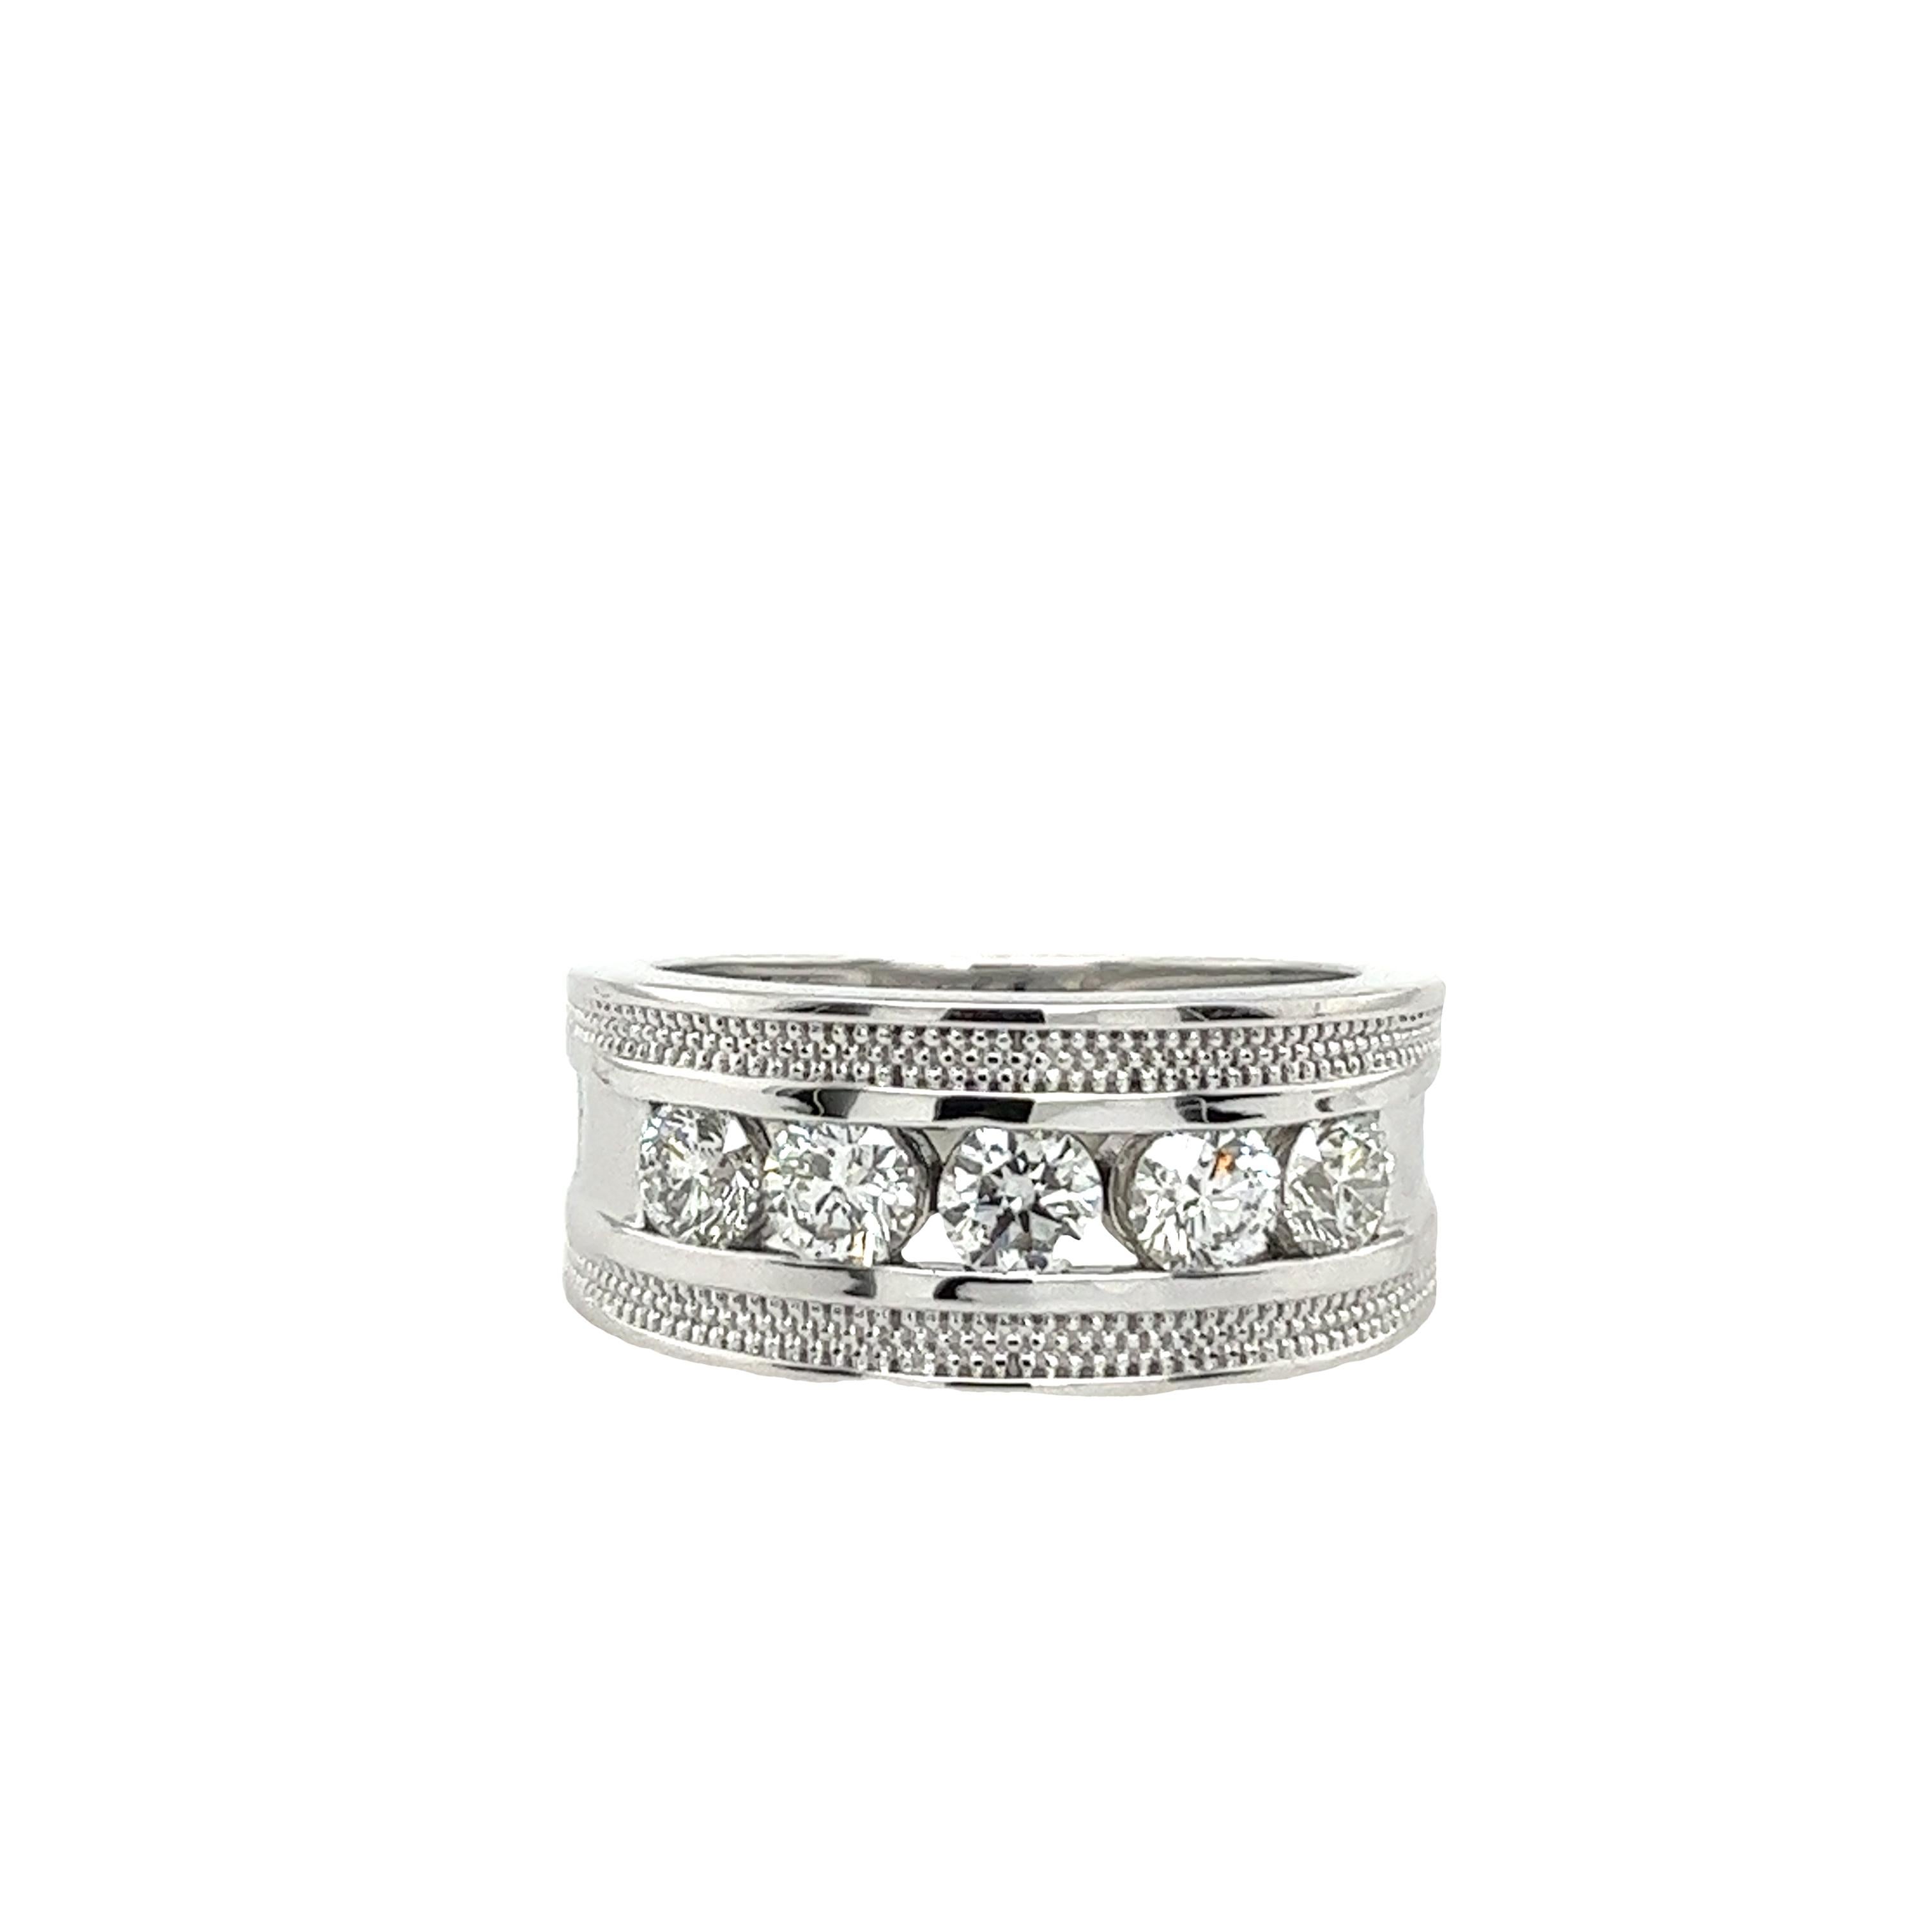 18ct White Gold 5 Stone Gia Diamond Ring, Set With 1.50ct G Colour IF clarity For Sale